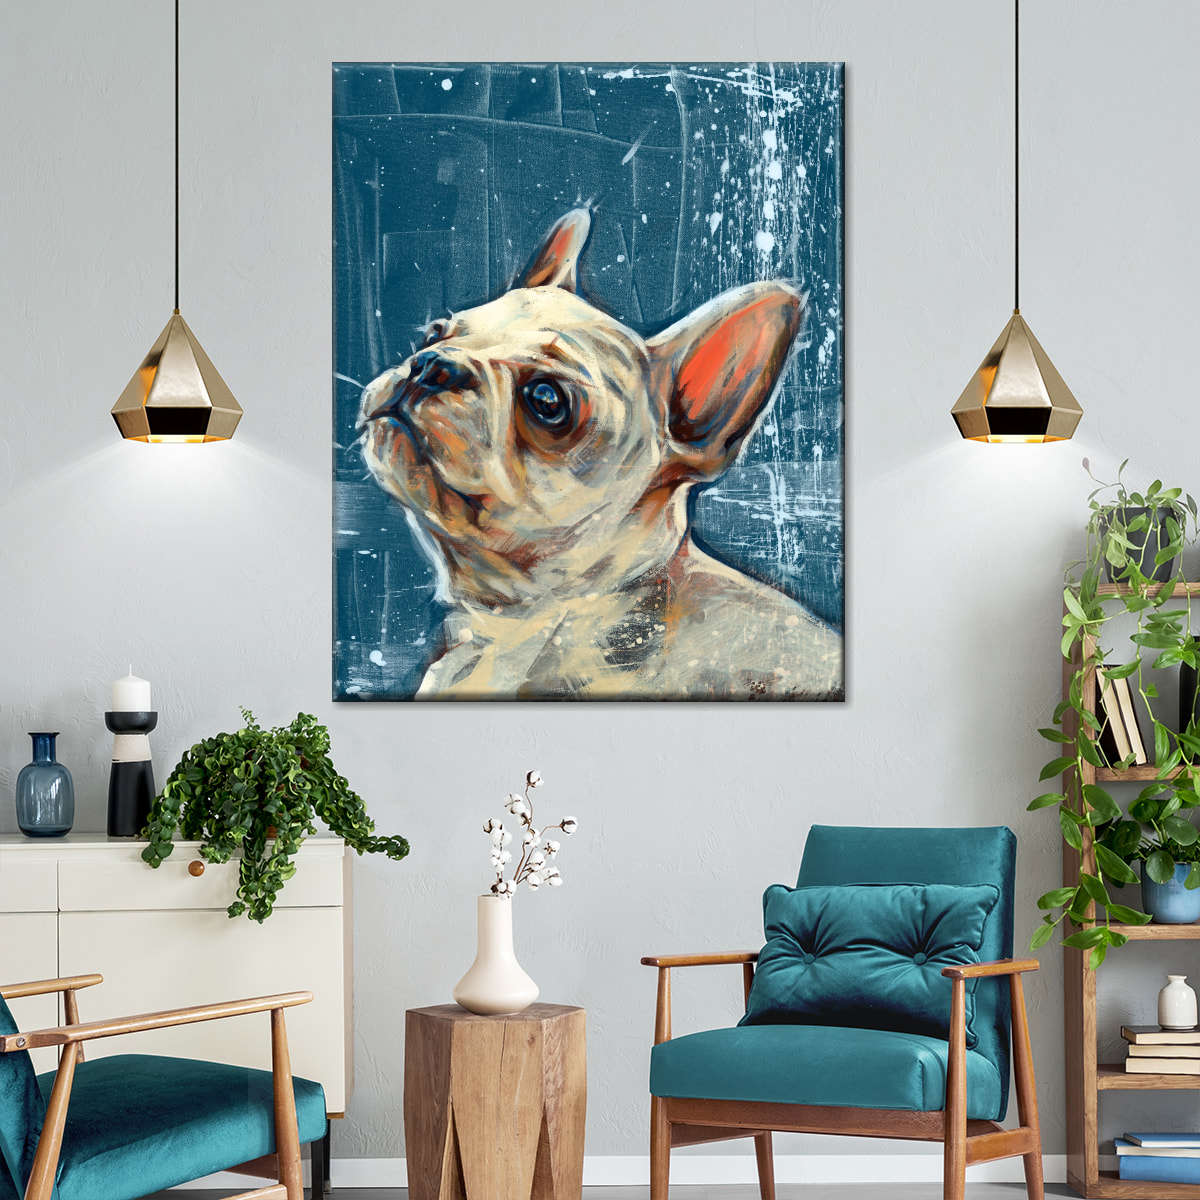 How To Turn Animal Photos into a Canvas Print - Photographer’s Guide